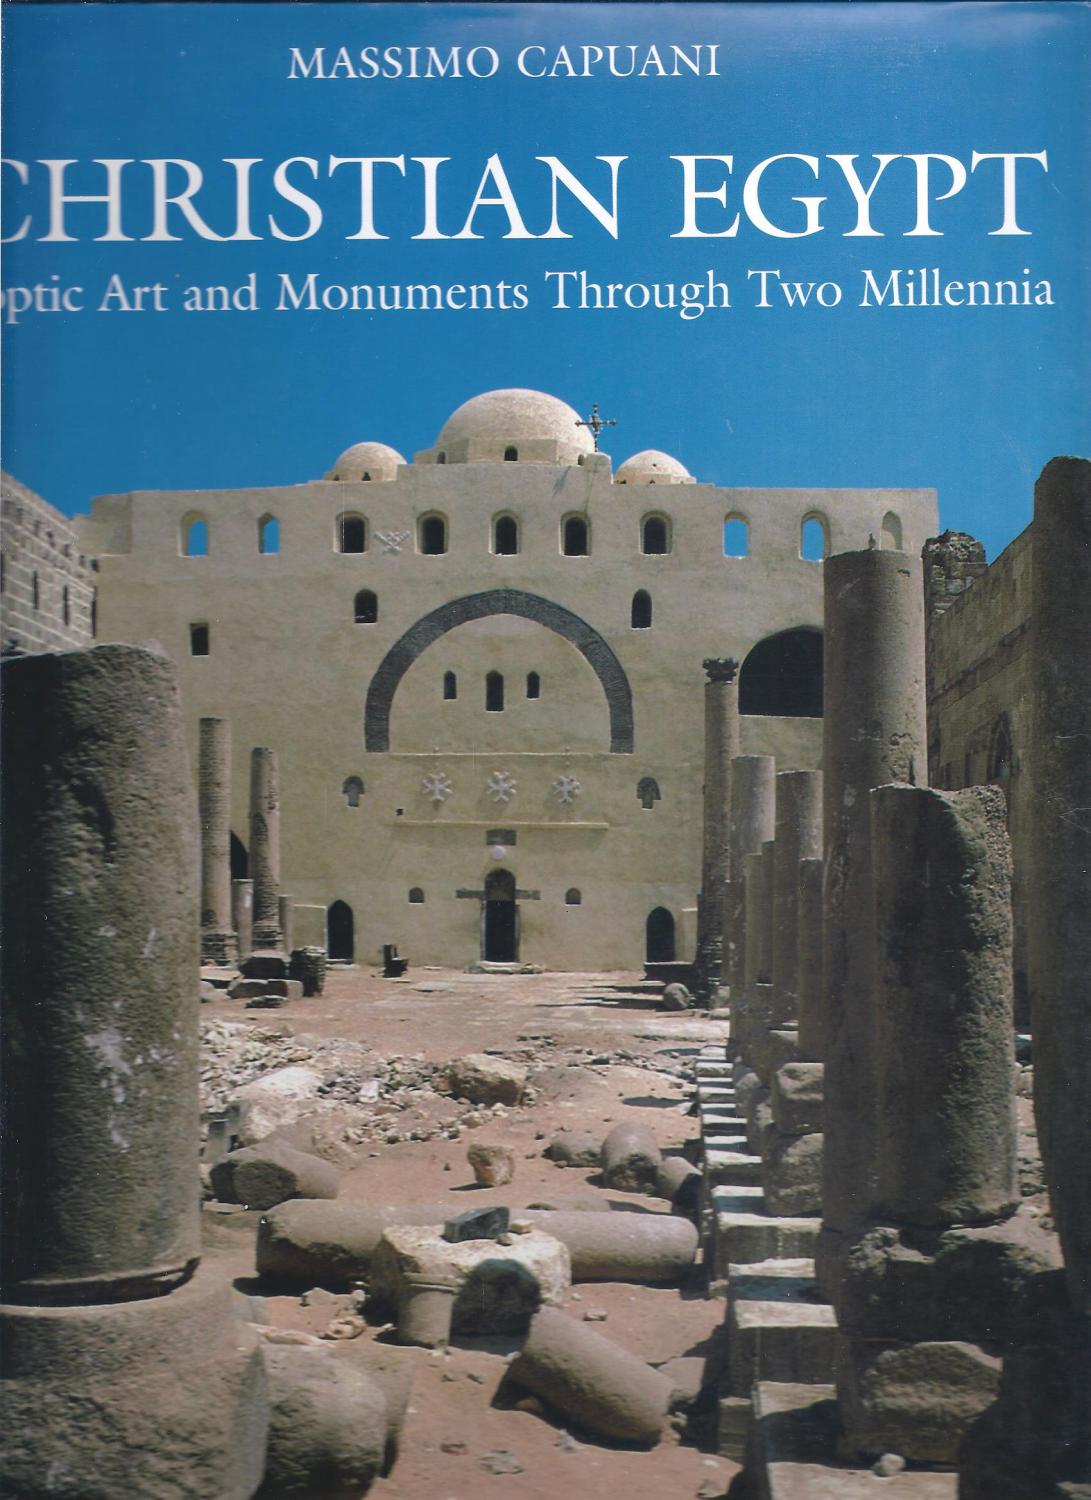 Christian Egypt: Coptic Art and Monuments Through Two Millennia - Massimo Capuani with Otto F. A. Meinardus & Marie-Helene Rutschowscaya